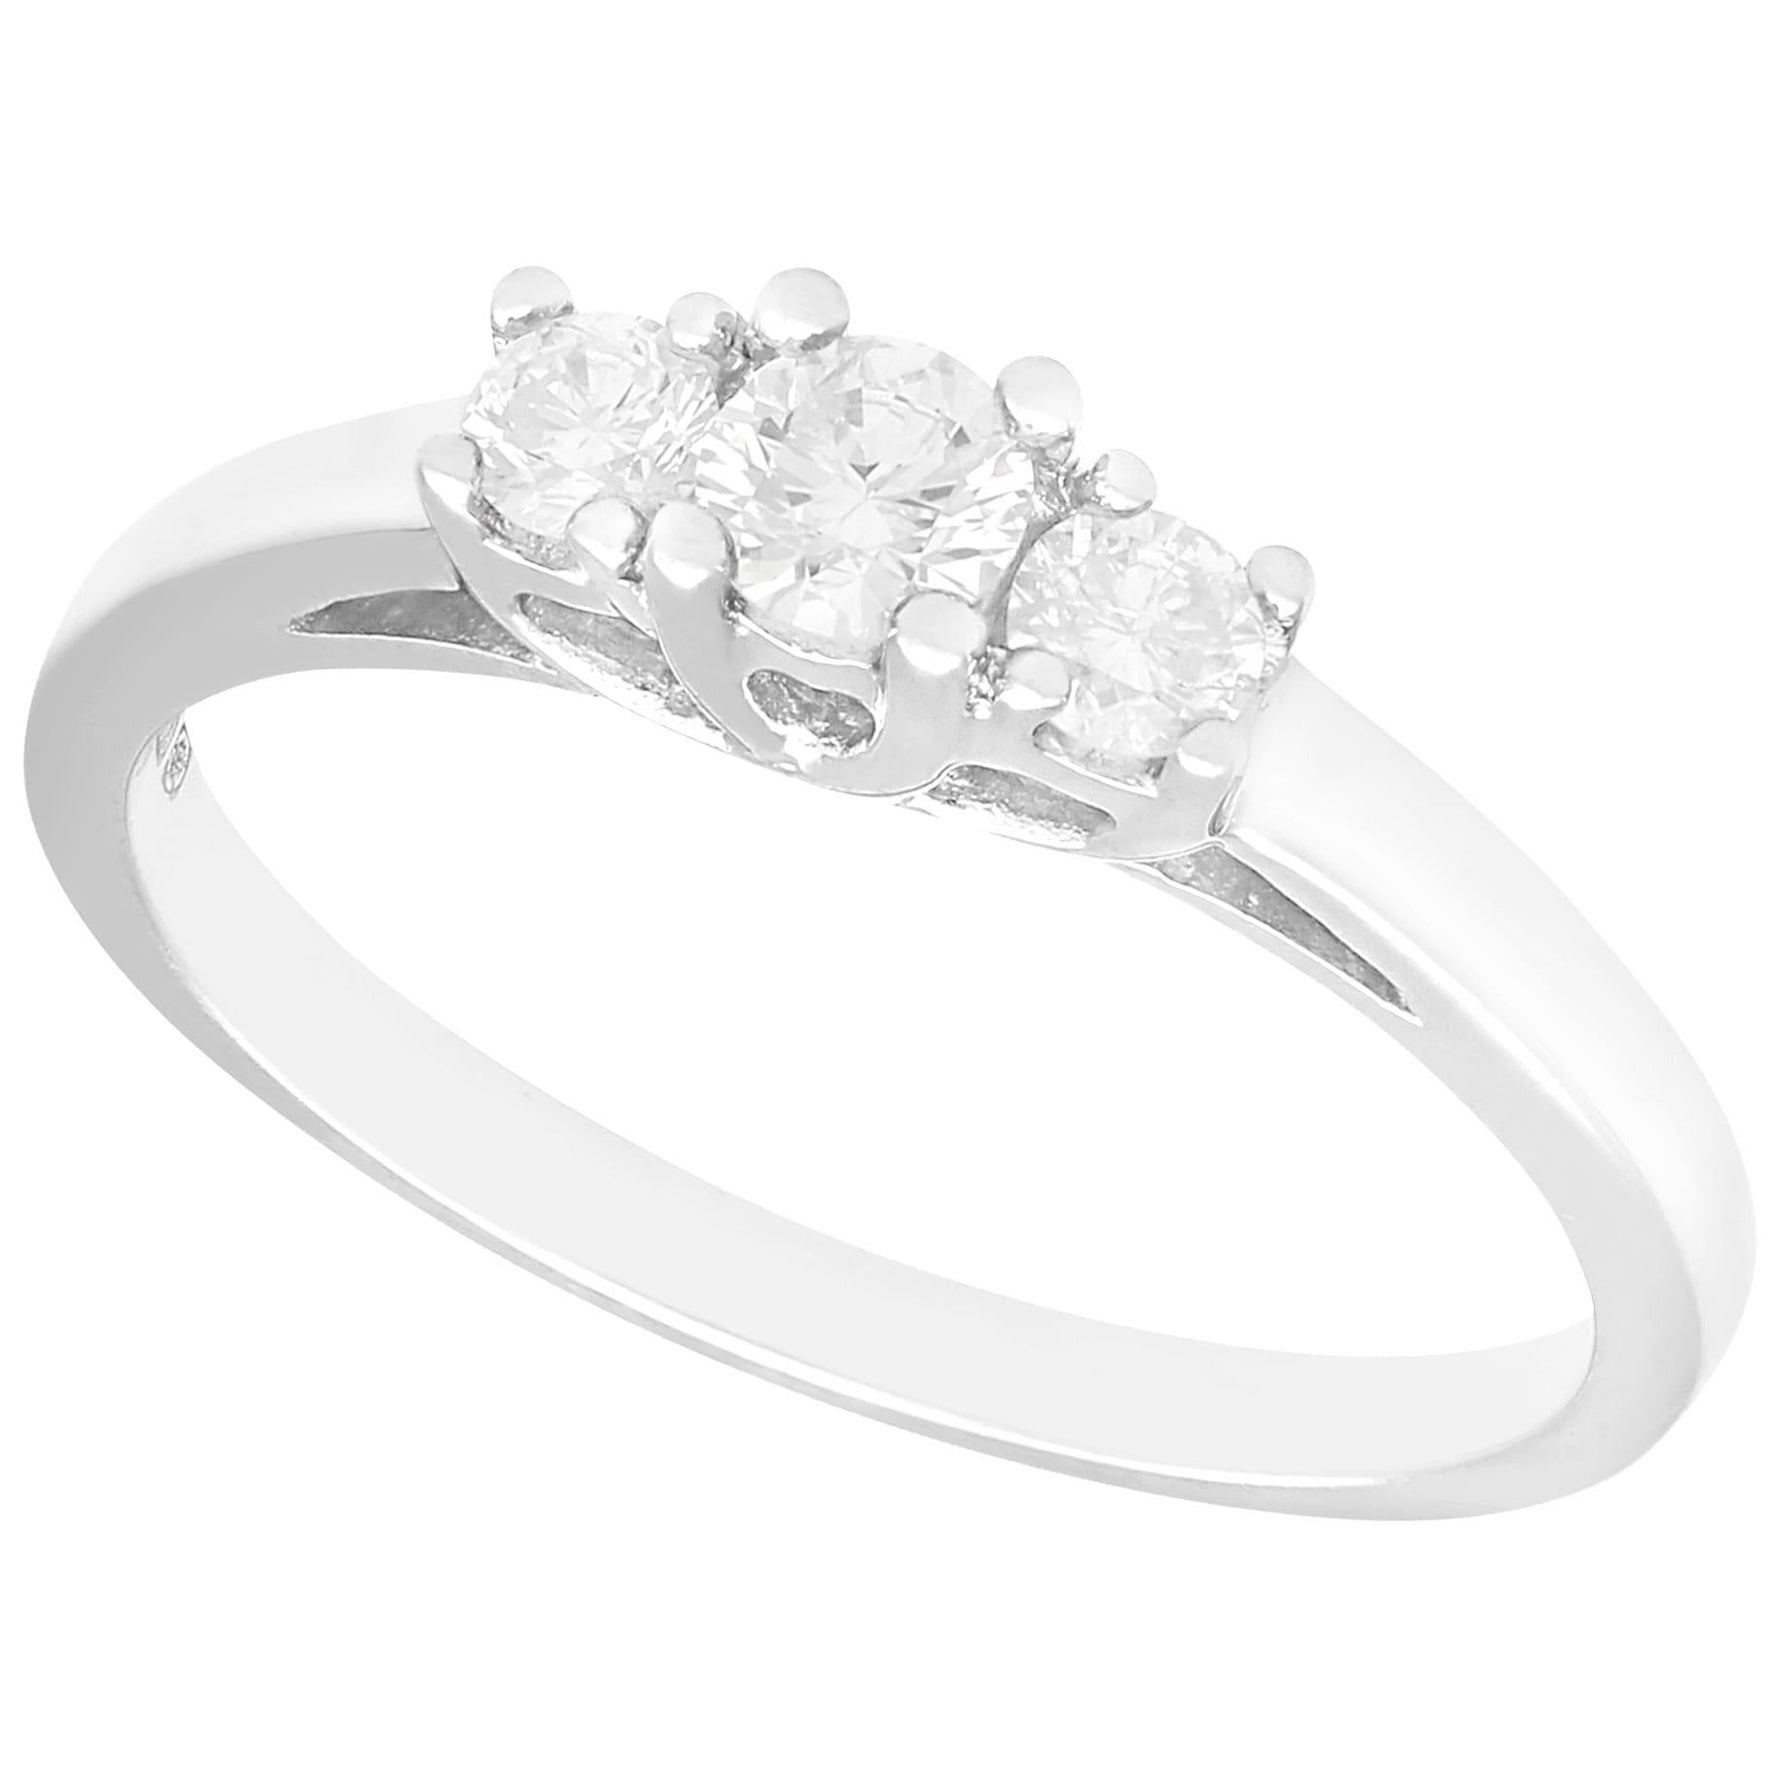 21ct Century Diamond and White Gold Trilogy Engagement Ring